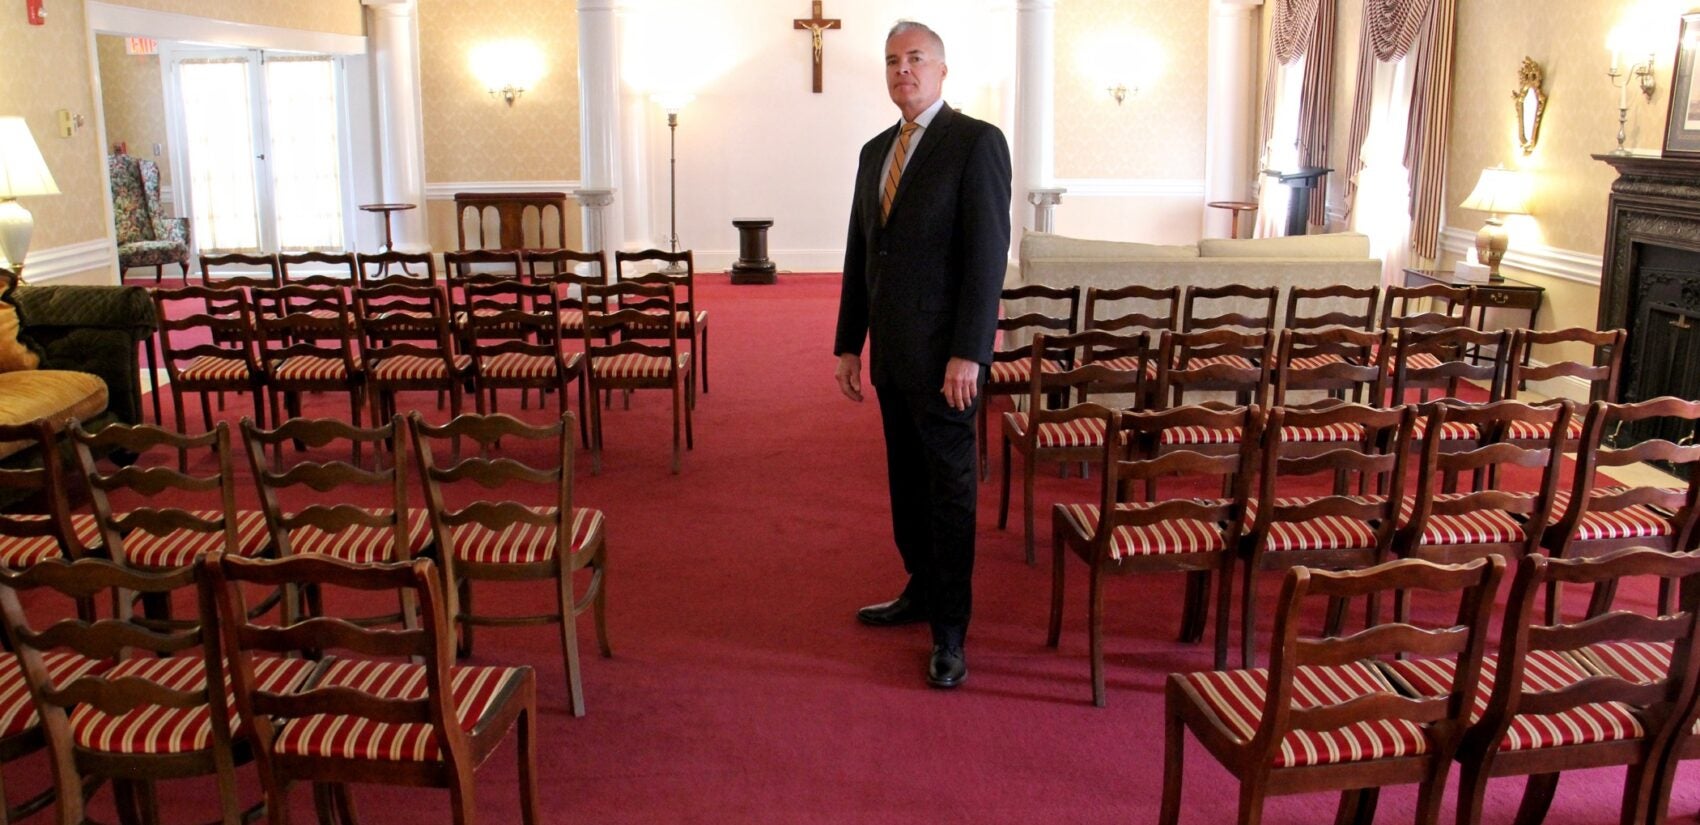 Funeral director Kurt Larsen stands in the empty chapel at Volk Leber Funeral Home in Teaneck, N.J. The chapel hasn't been used since limits on social gatherings went into effect for the region. (Emma Lee/WHYY)